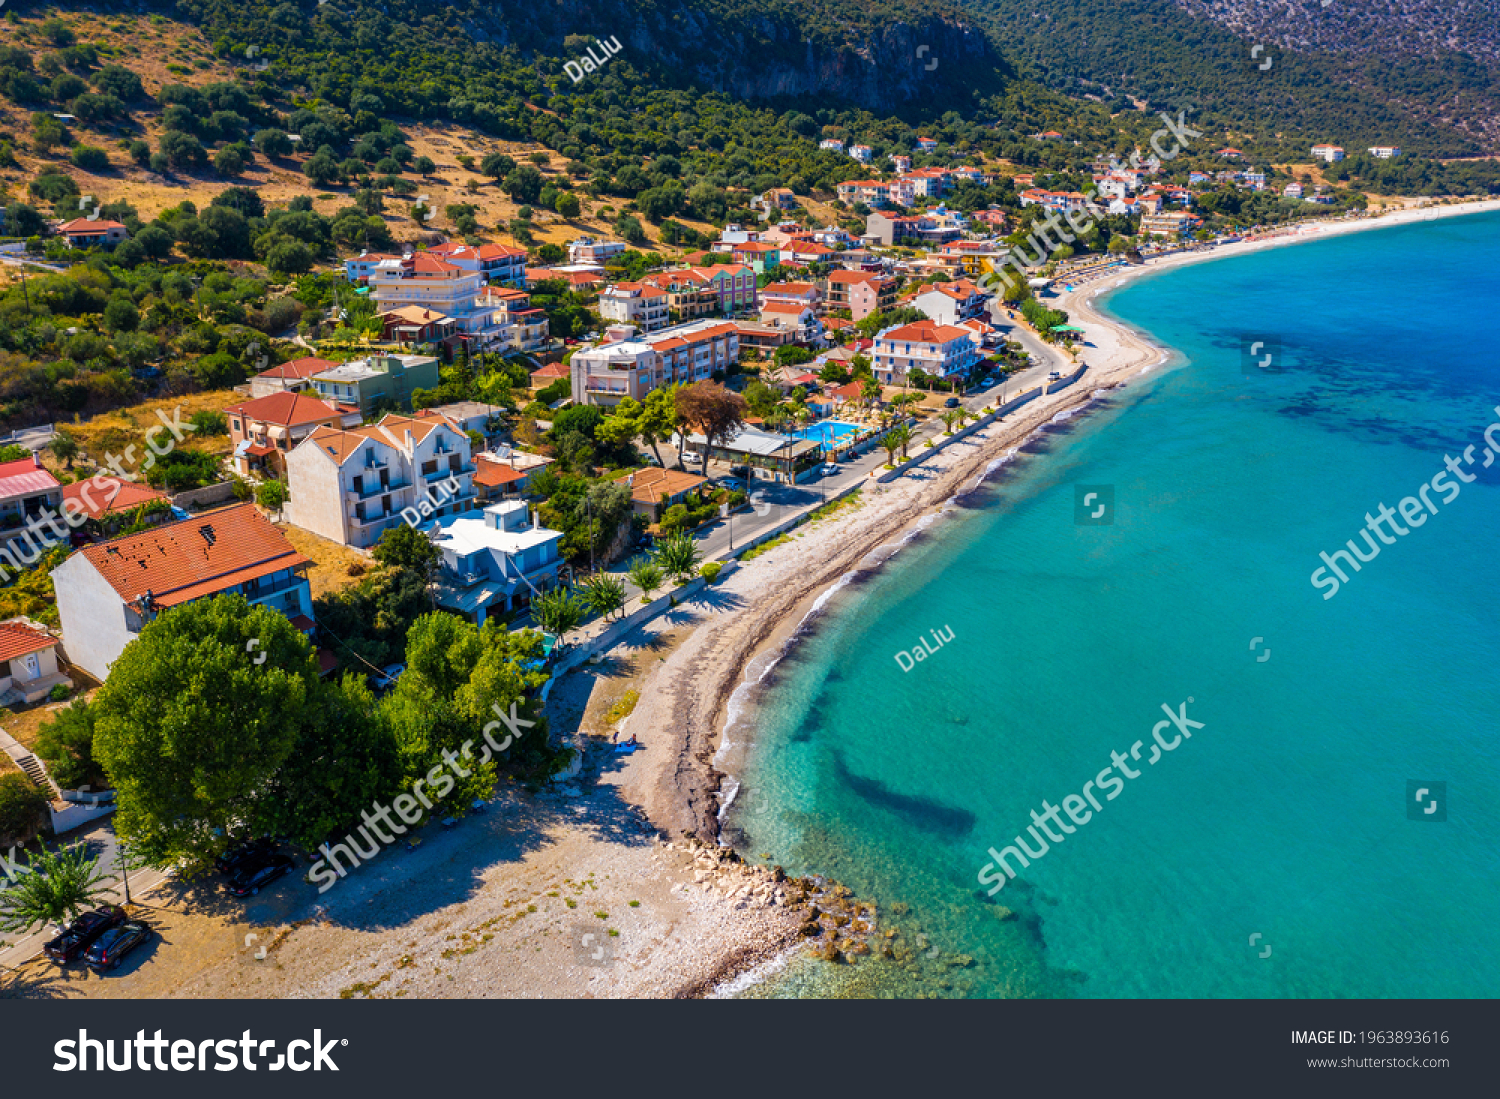 Aerial view of city of Poros, Kefalonia island in Greece. Poros city in middle of the day. Cephalonia or Kefalonia island, Ionian Sea, Greece. Poros village, Kefalonia island, Ionian islands, Greece. #1963893616